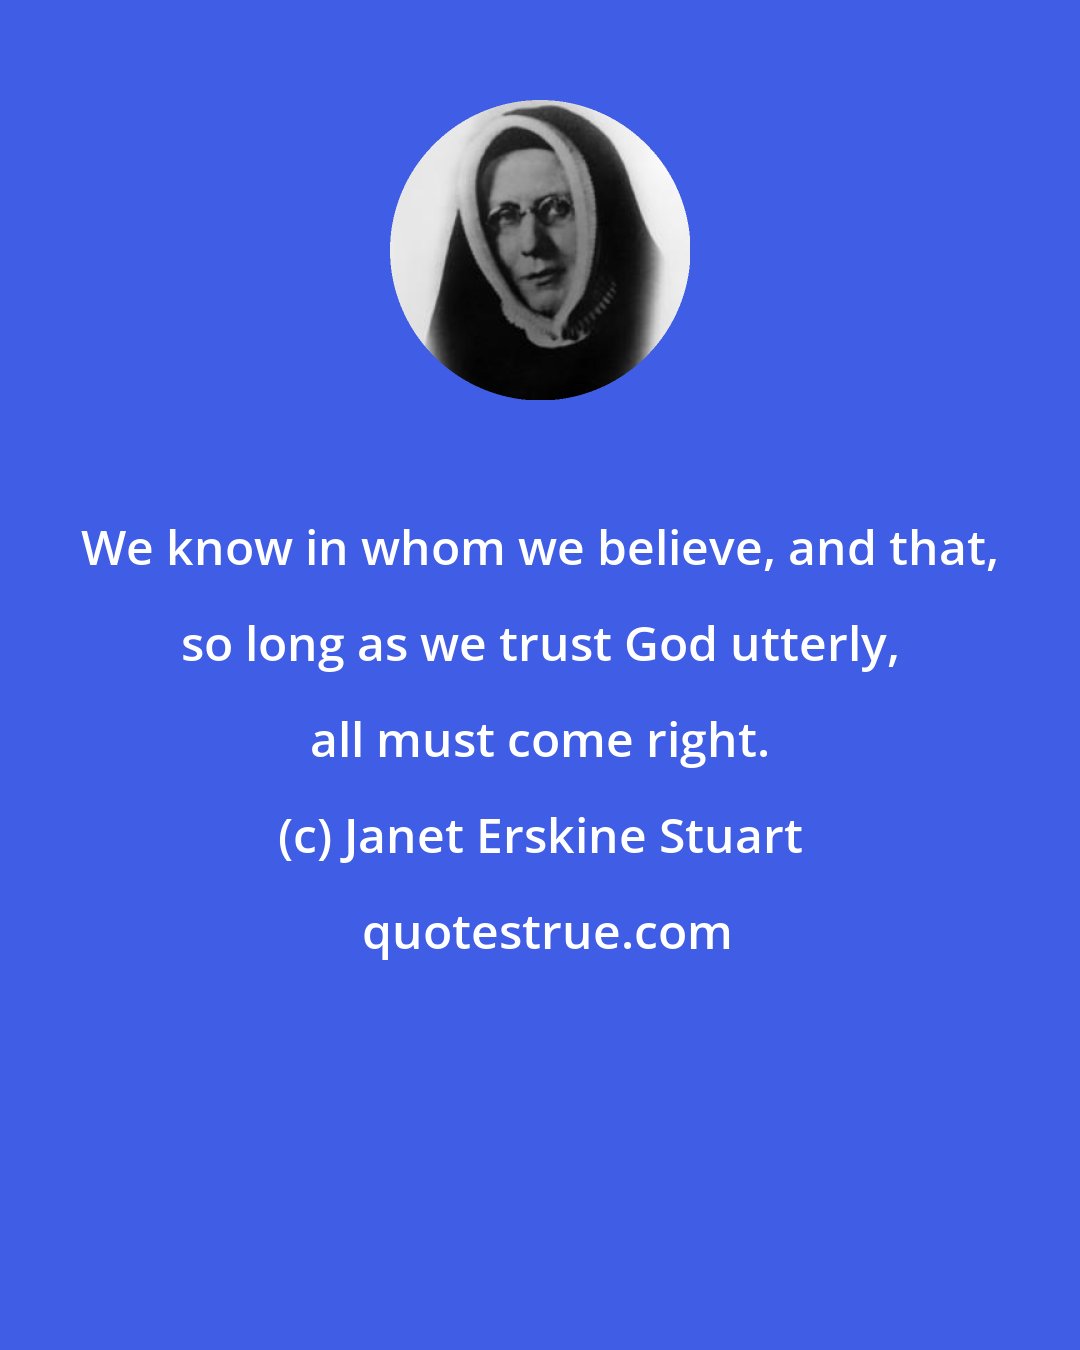 Janet Erskine Stuart: We know in whom we believe, and that, so long as we trust God utterly, all must come right.